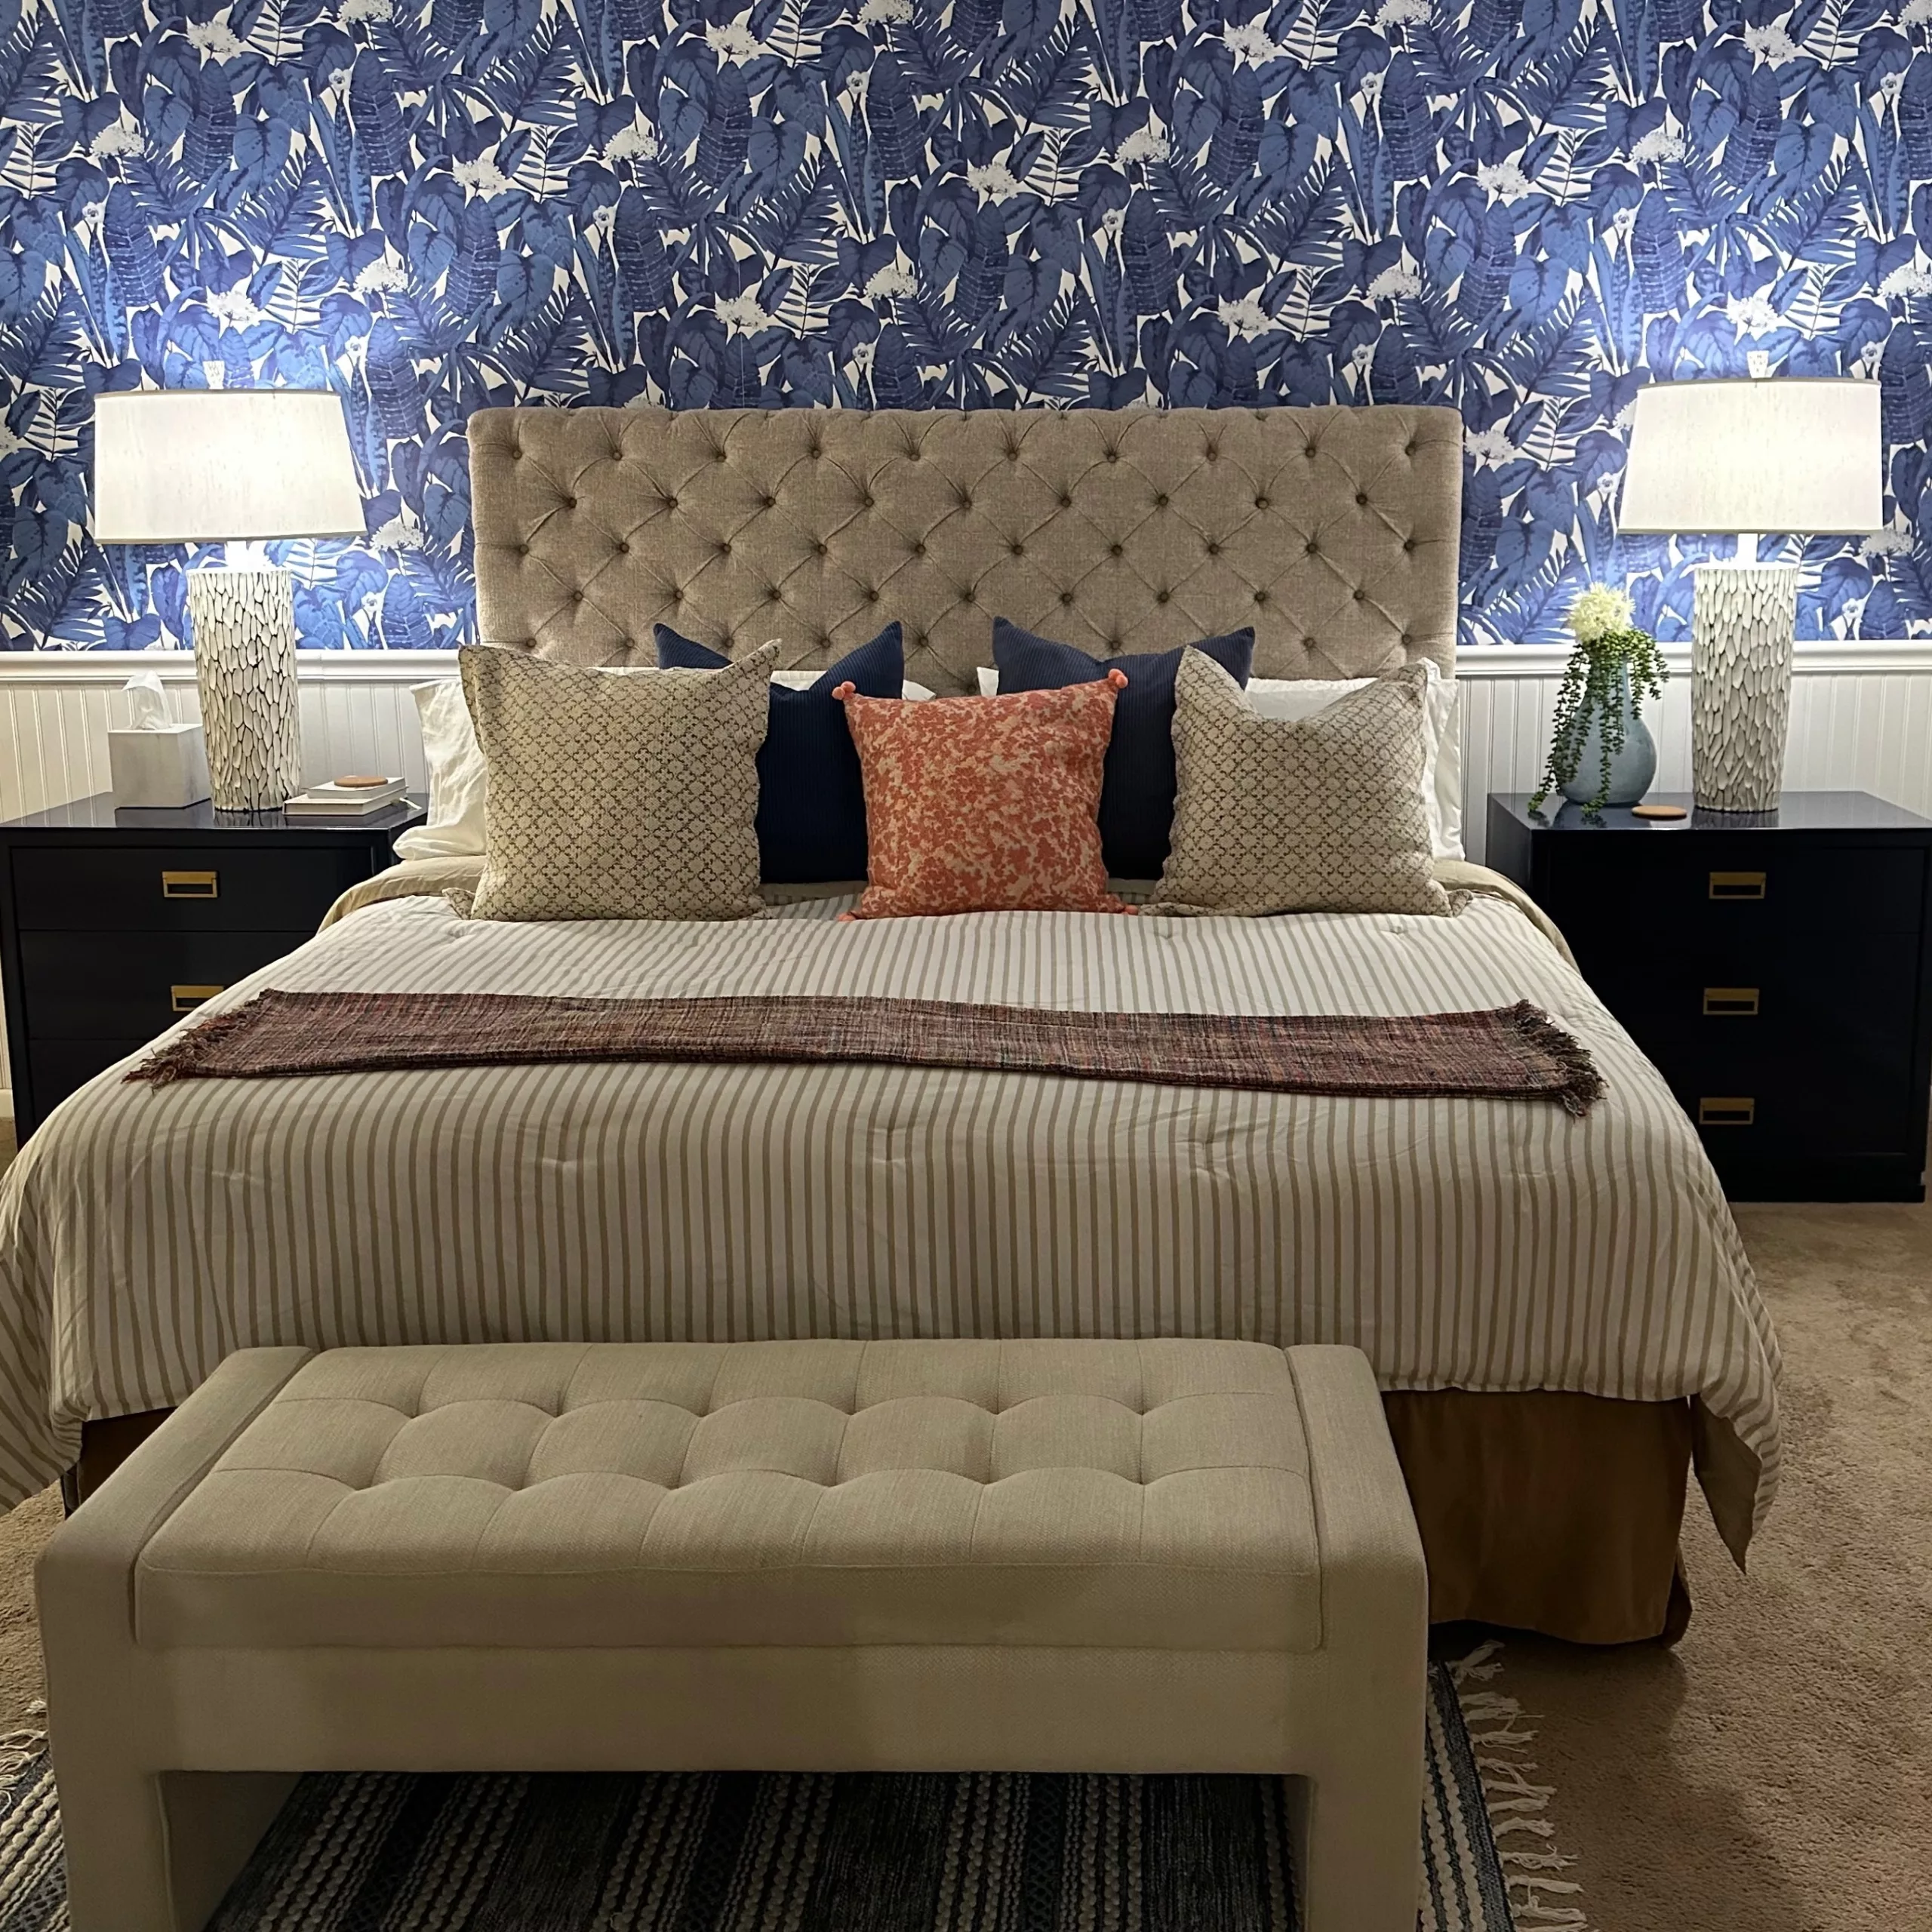 bedrooms setting with blue and white tones